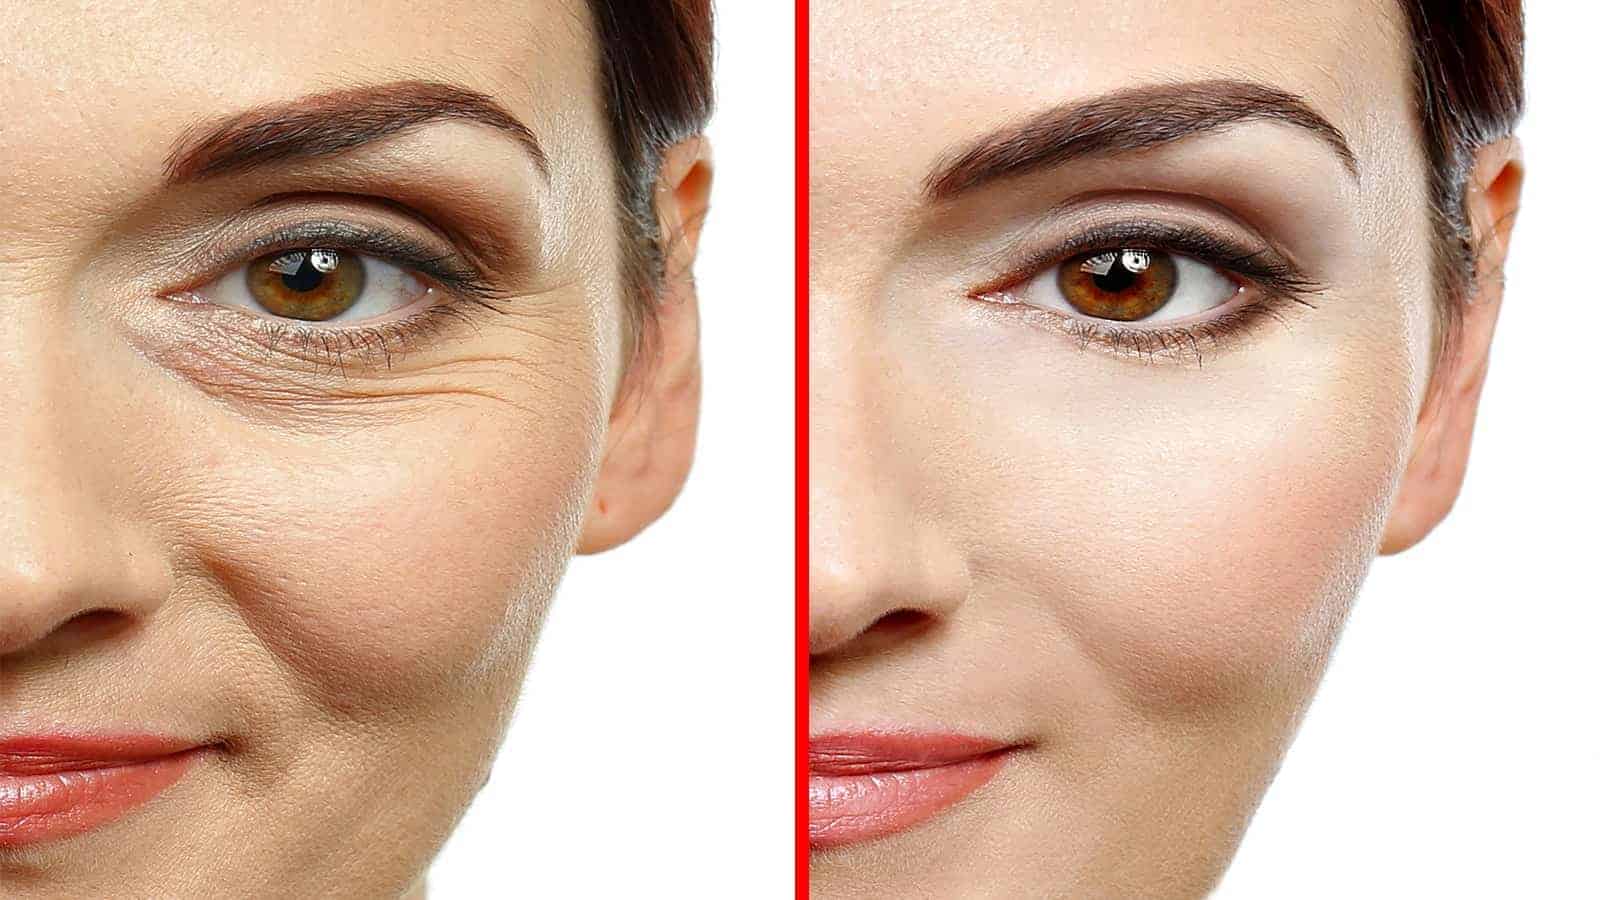 How to Make A Natural Botox With Only Three Ingredients